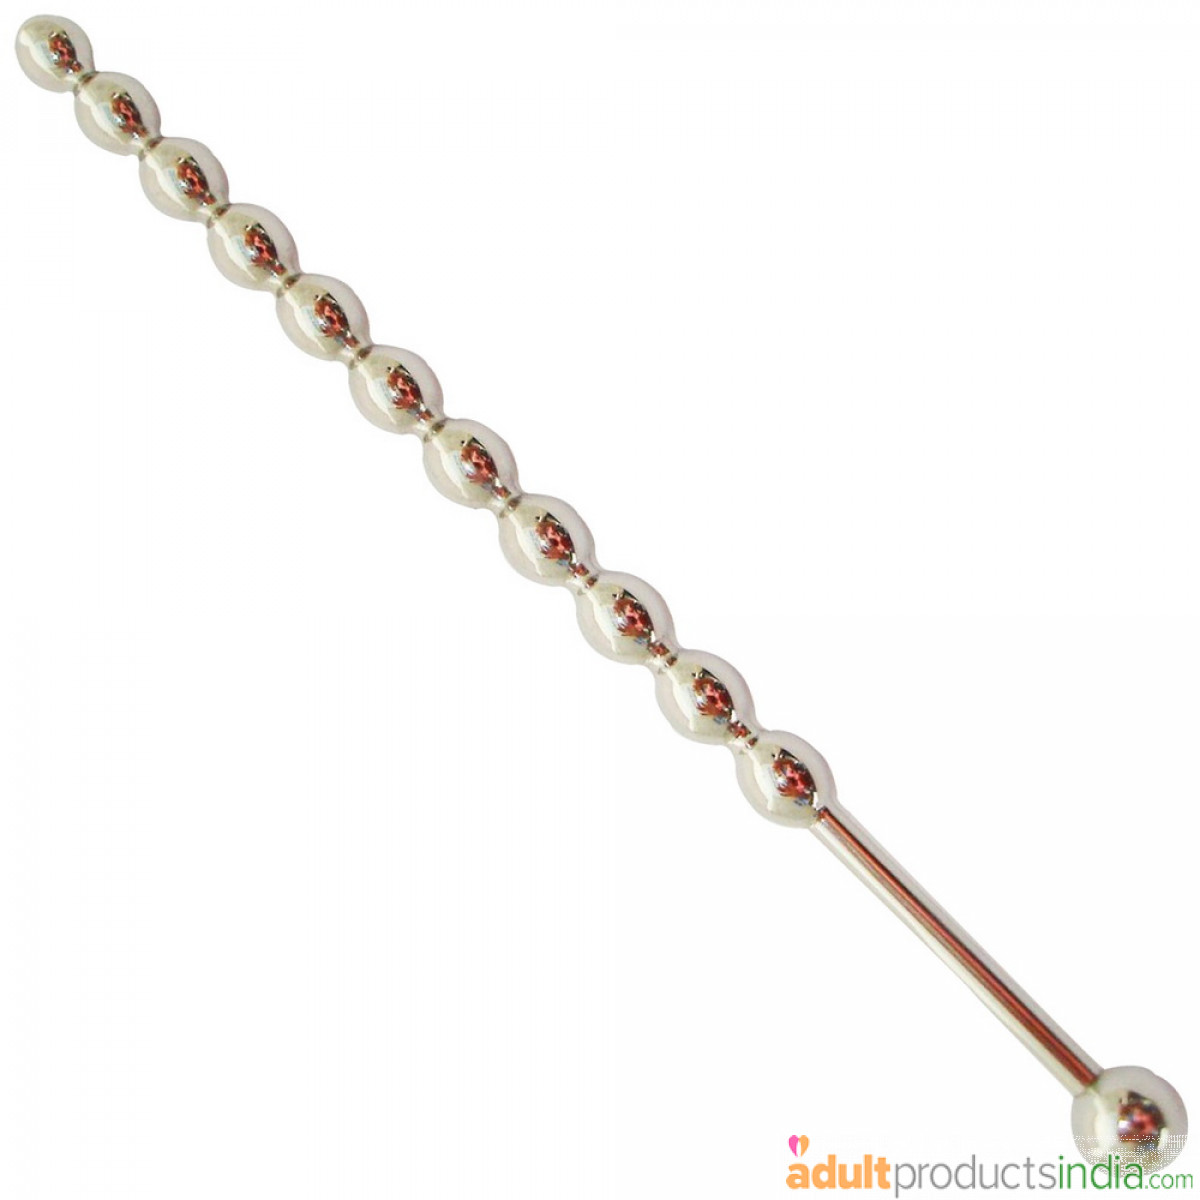 6", "Candy Stick" SOLID Surgical Steel Urethral Stretching Penis Plug